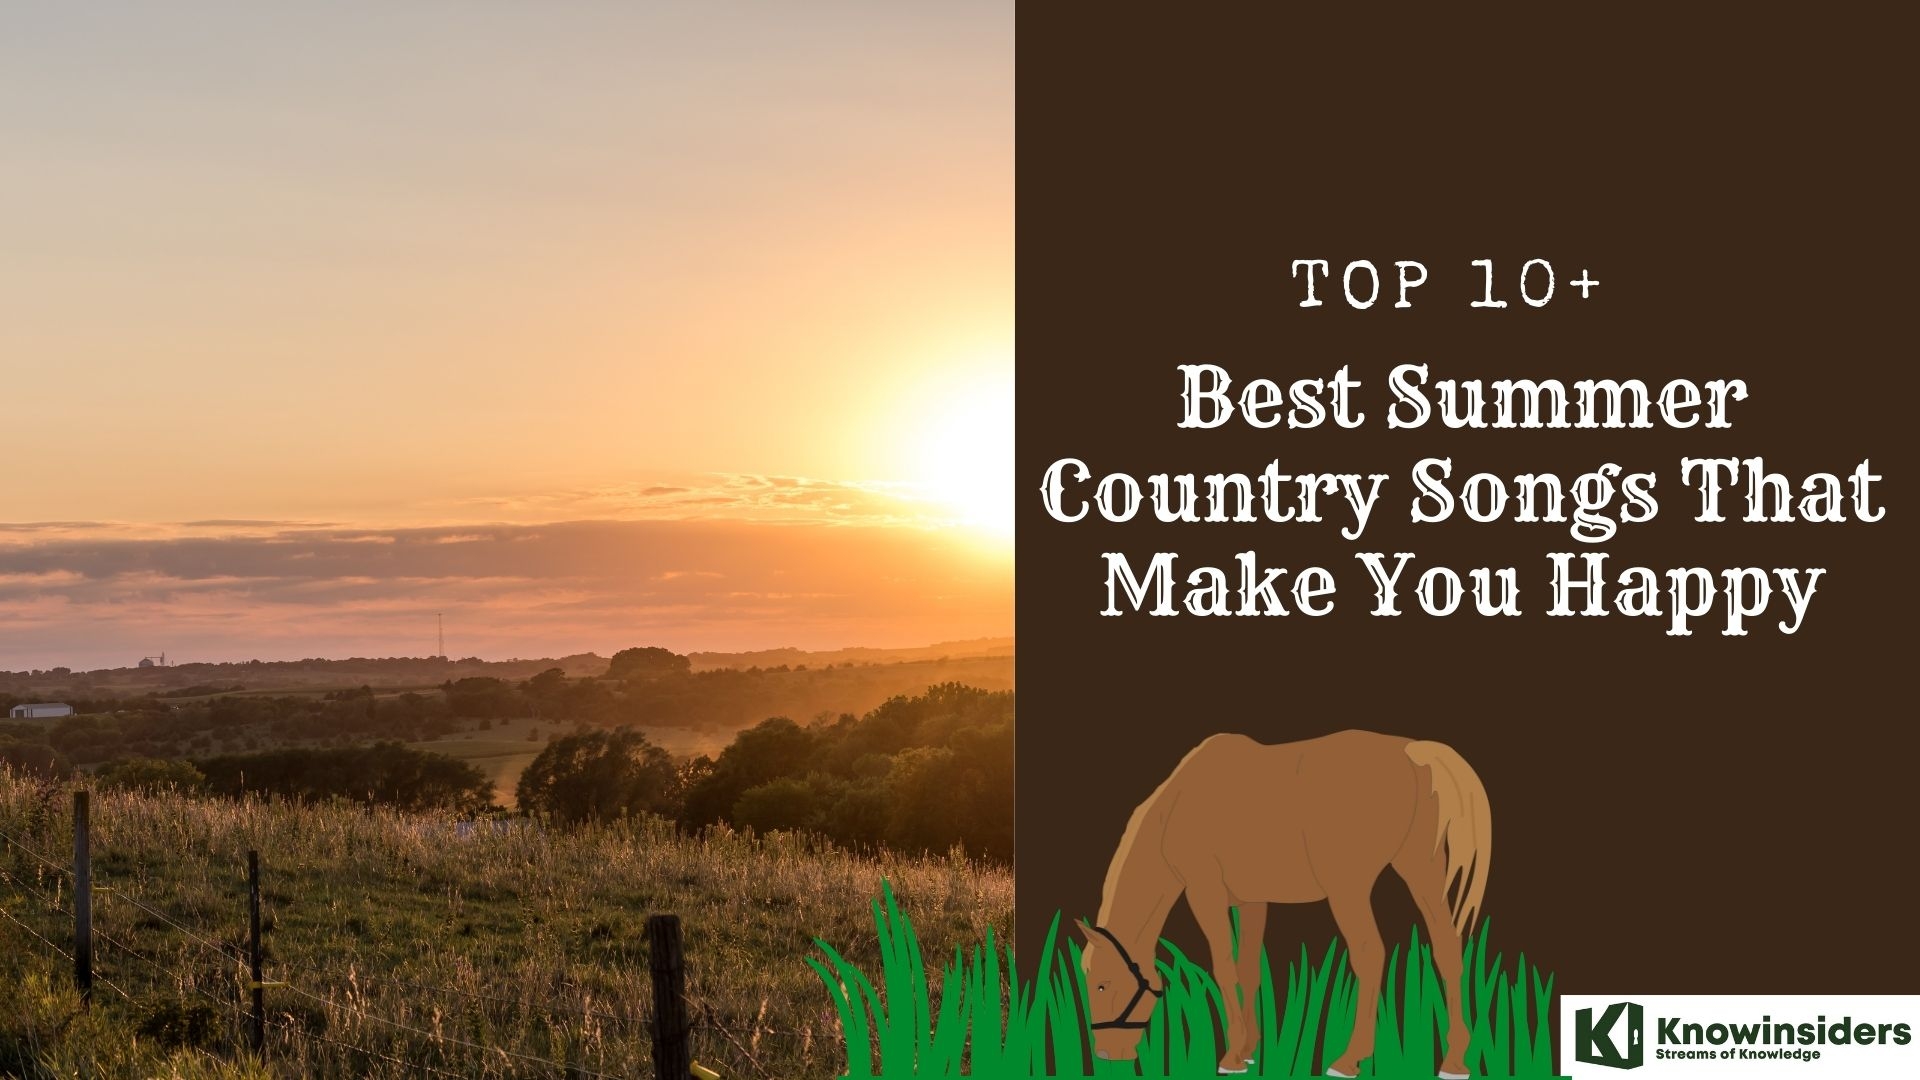 Top 10+ Best Summer Country Songs and Full Lyrics That Make You Happy